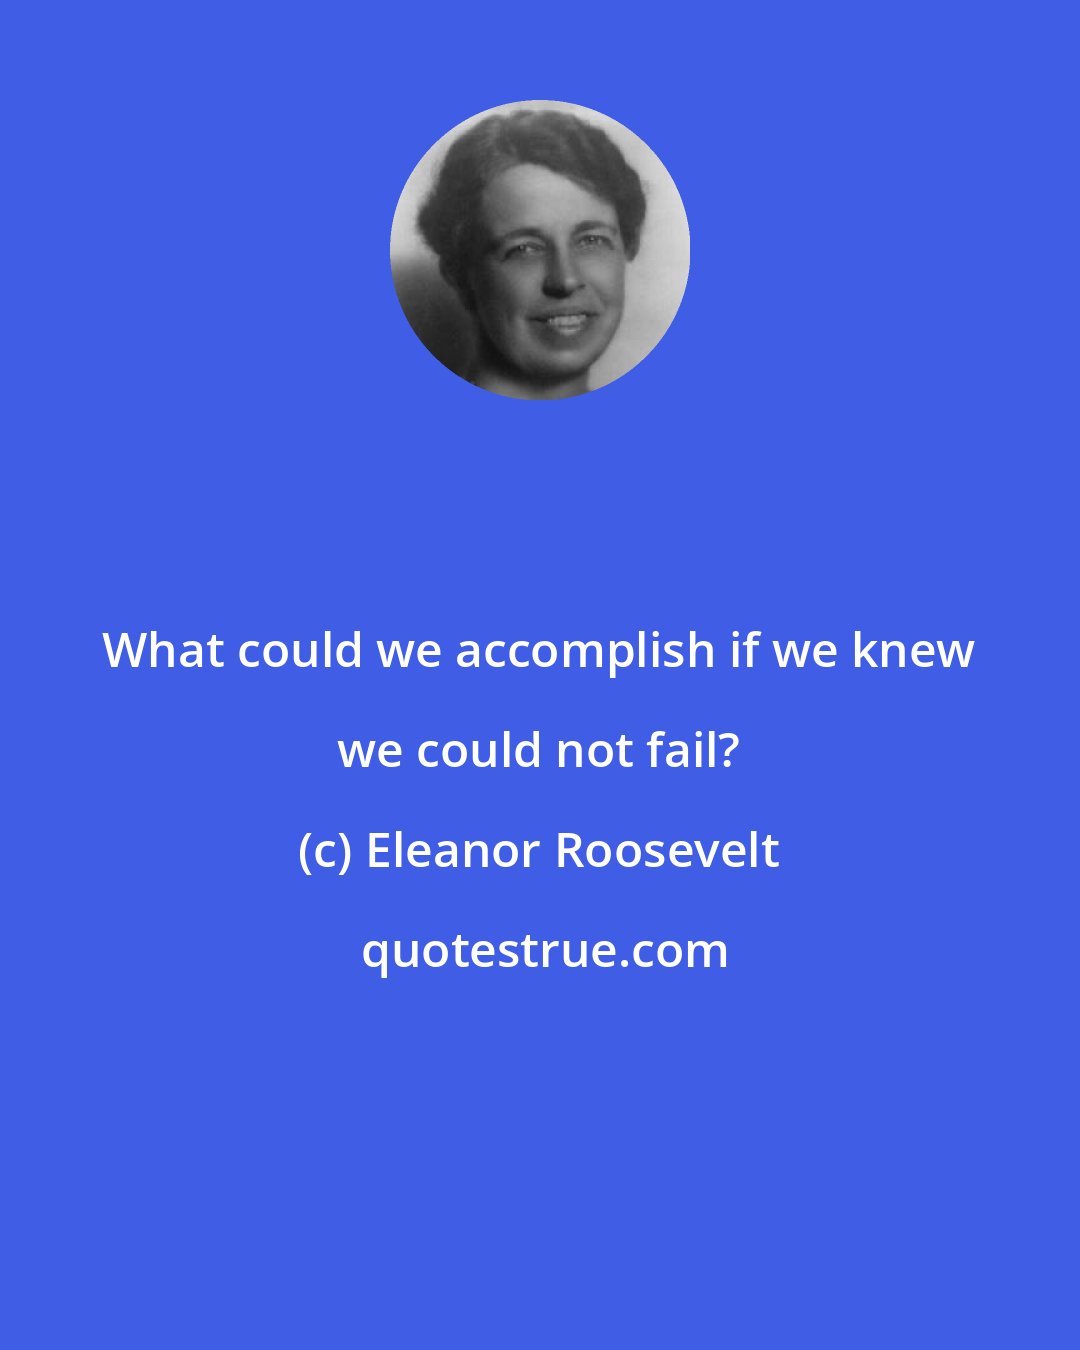 Eleanor Roosevelt: What could we accomplish if we knew we could not fail?